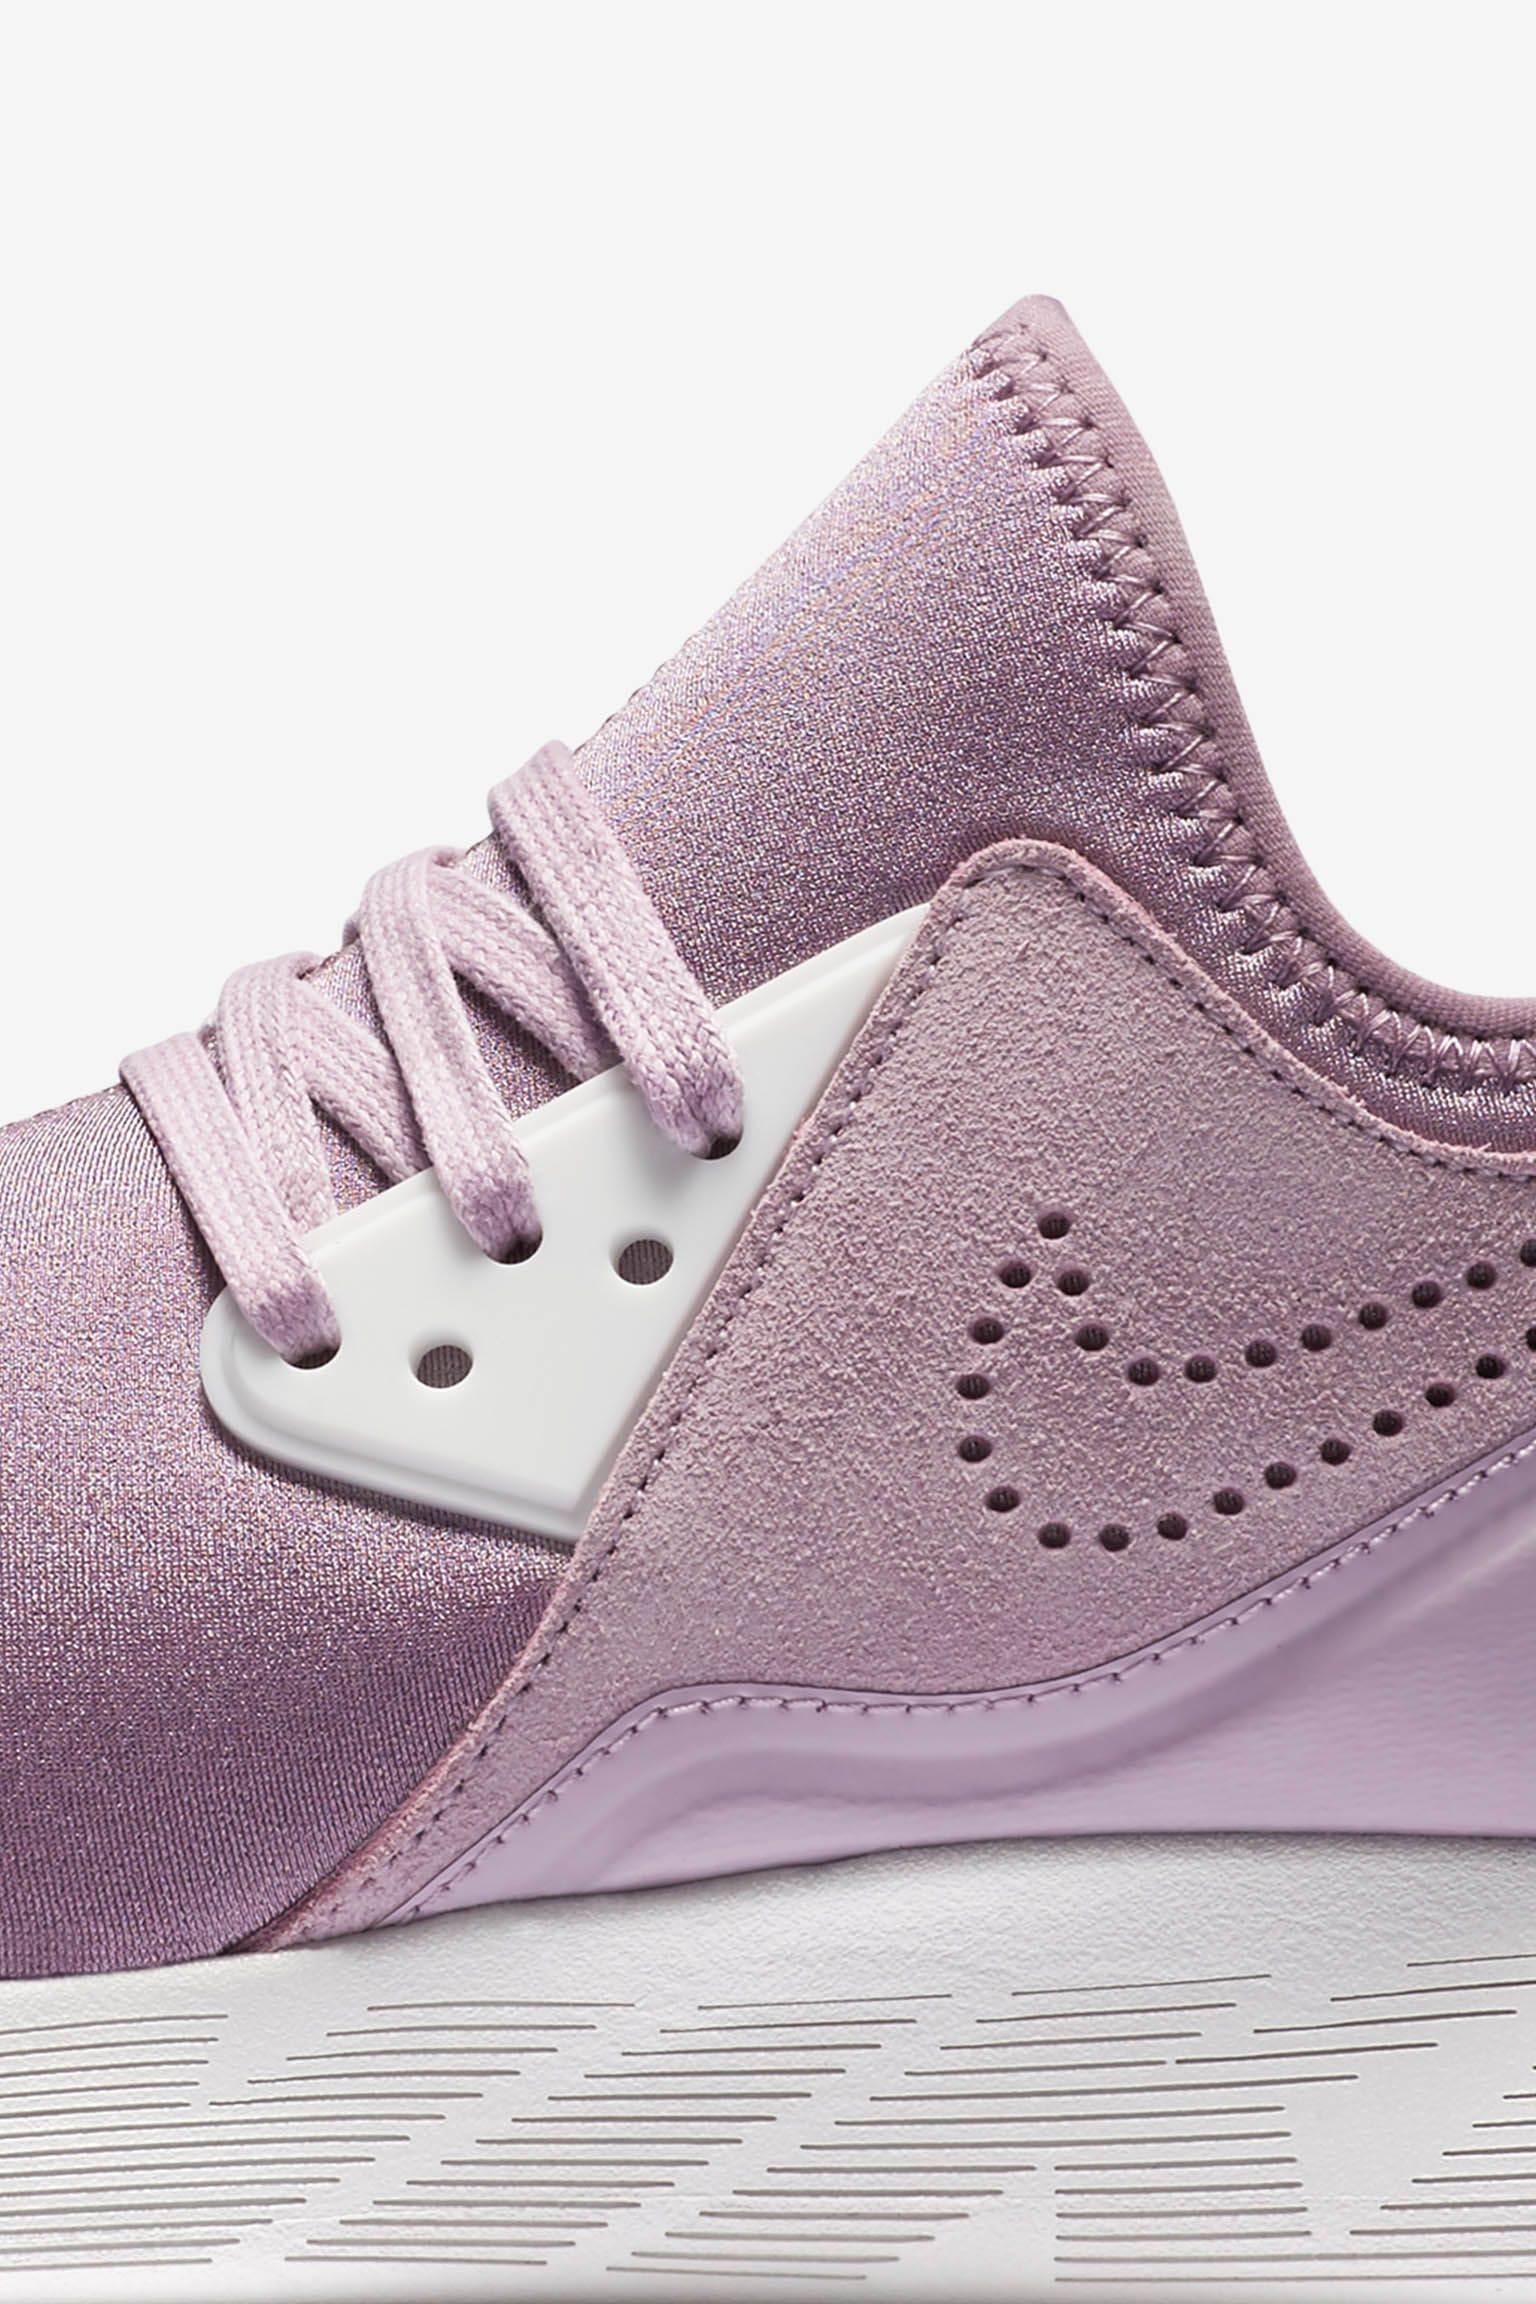 Fresco Mujer hermosa textura Nike LunarCharge Premium "Iced Lilac" para mujer. Nike SNKRS ES